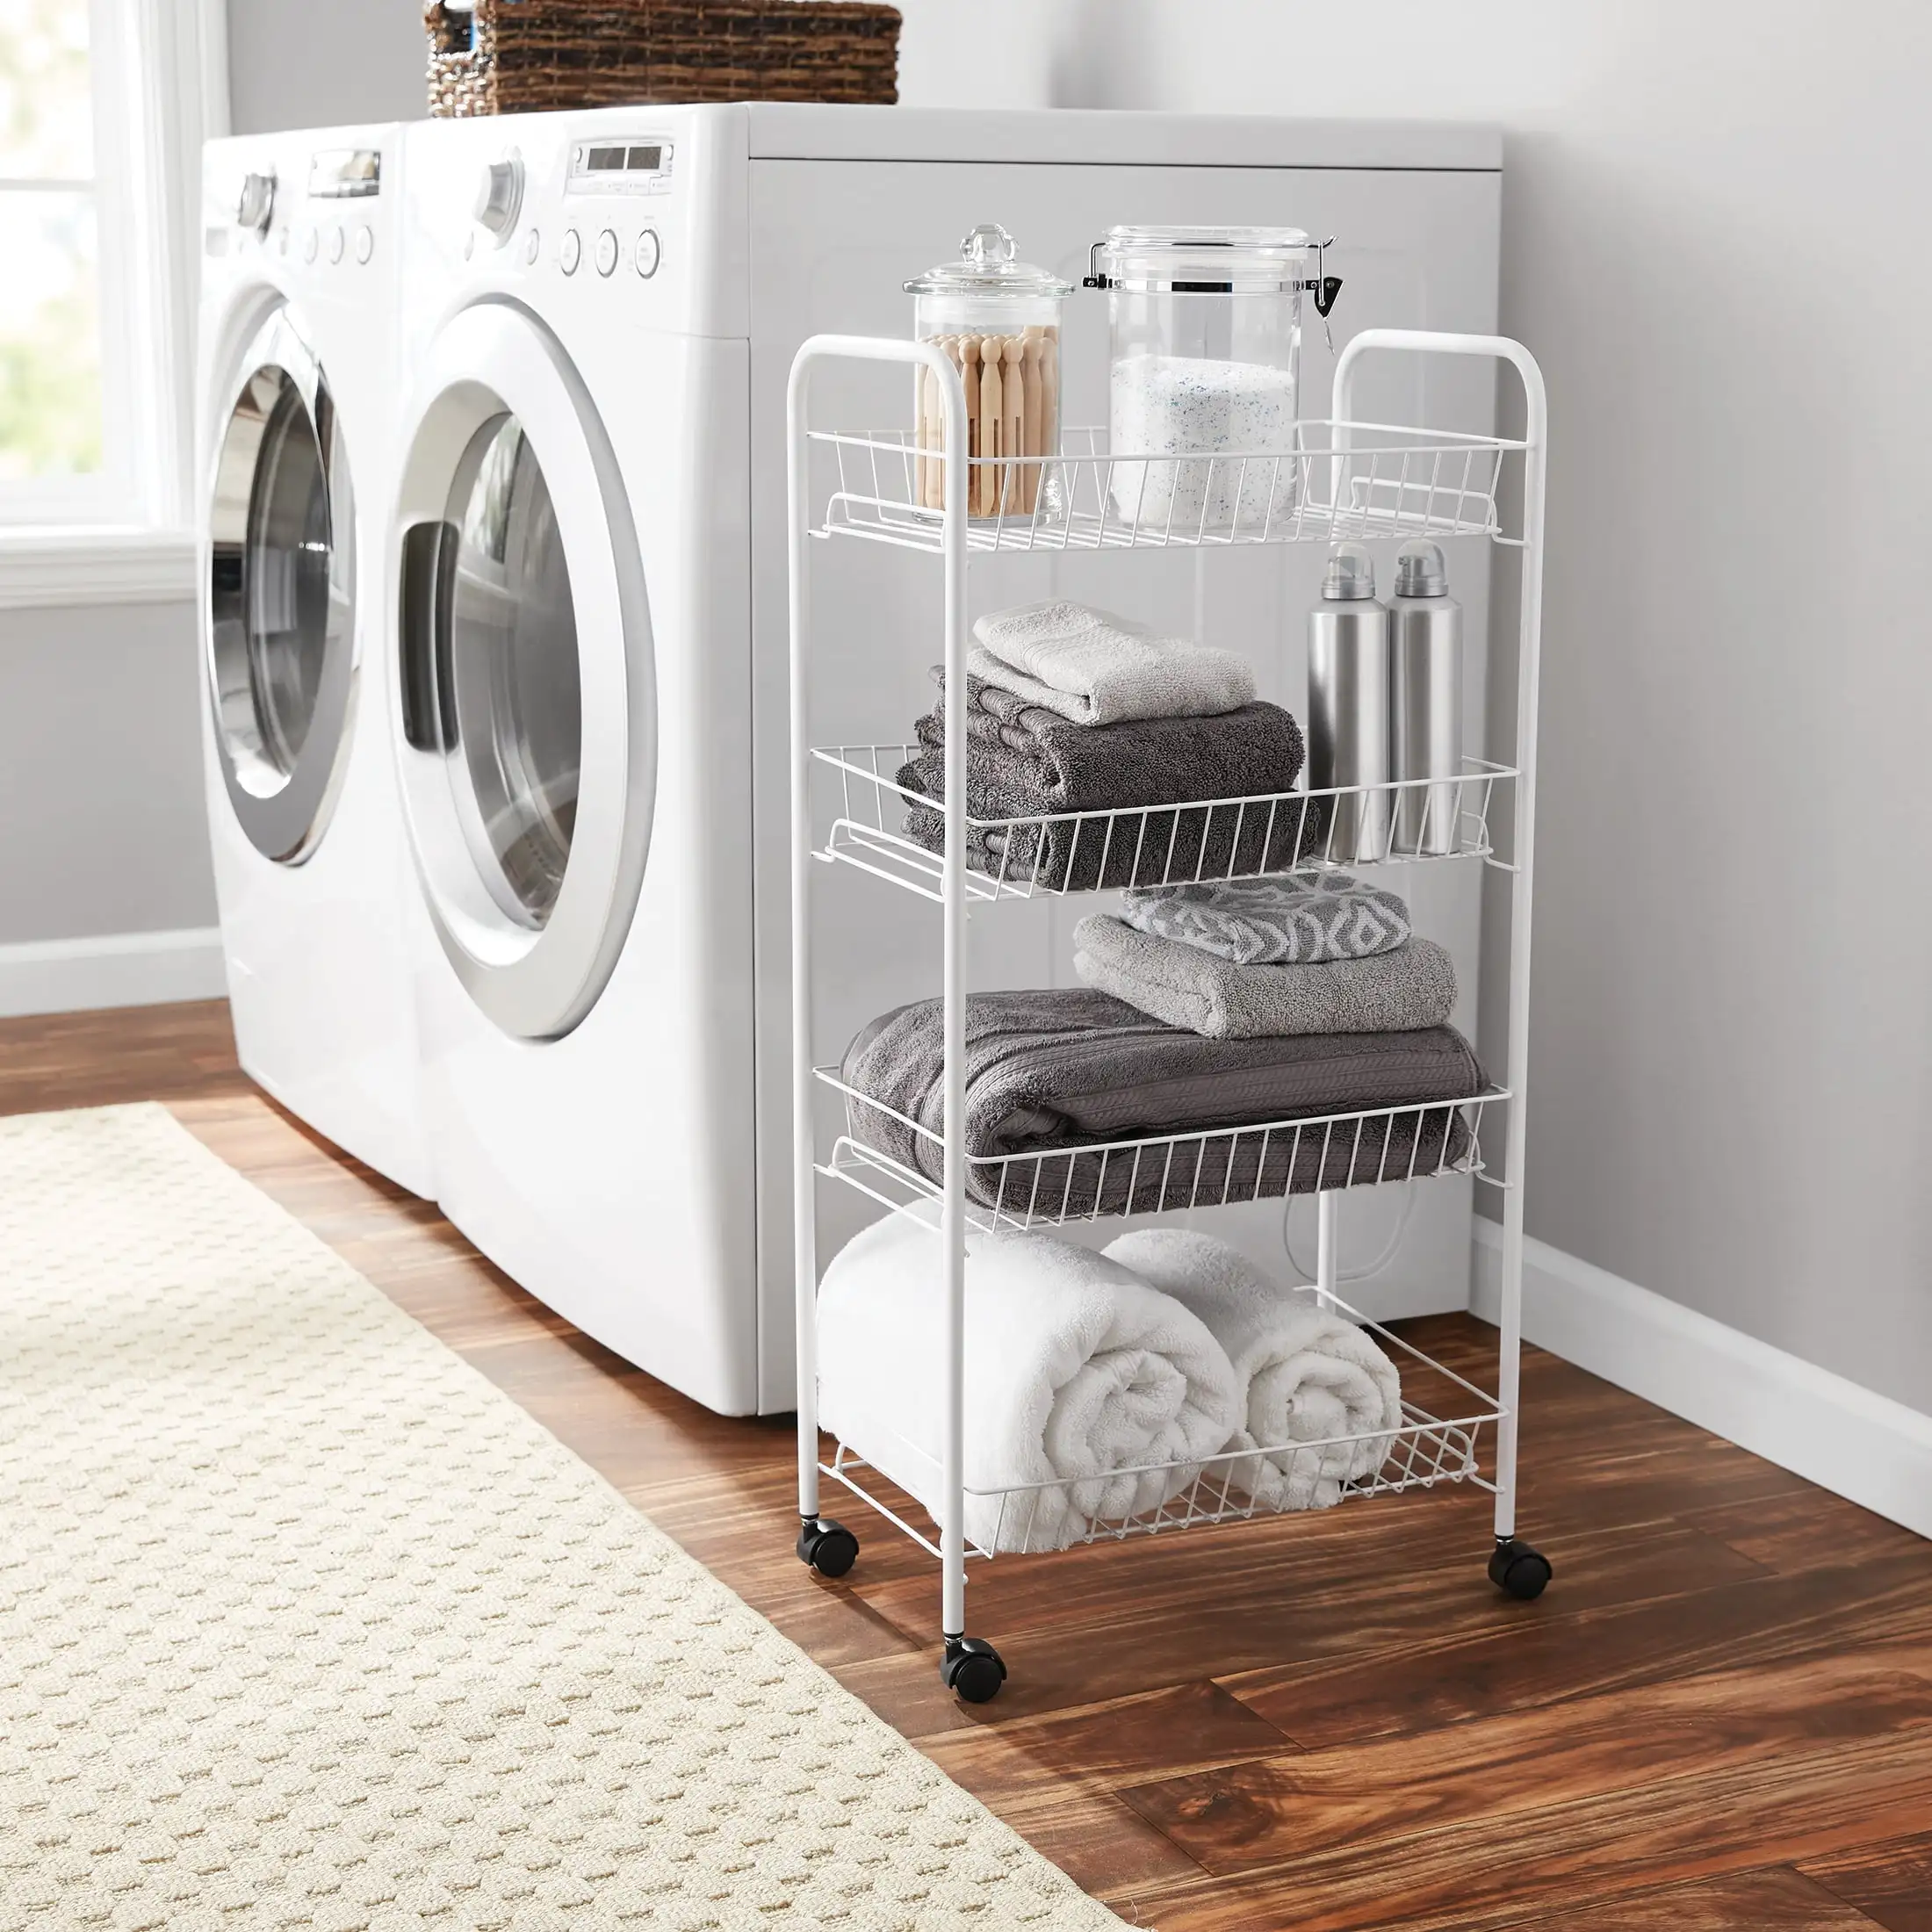 

4-Shelf Steel Laundry Cart with Caster Wheels, White, Adult, Senior and Teen Age Groups， kitchen storage